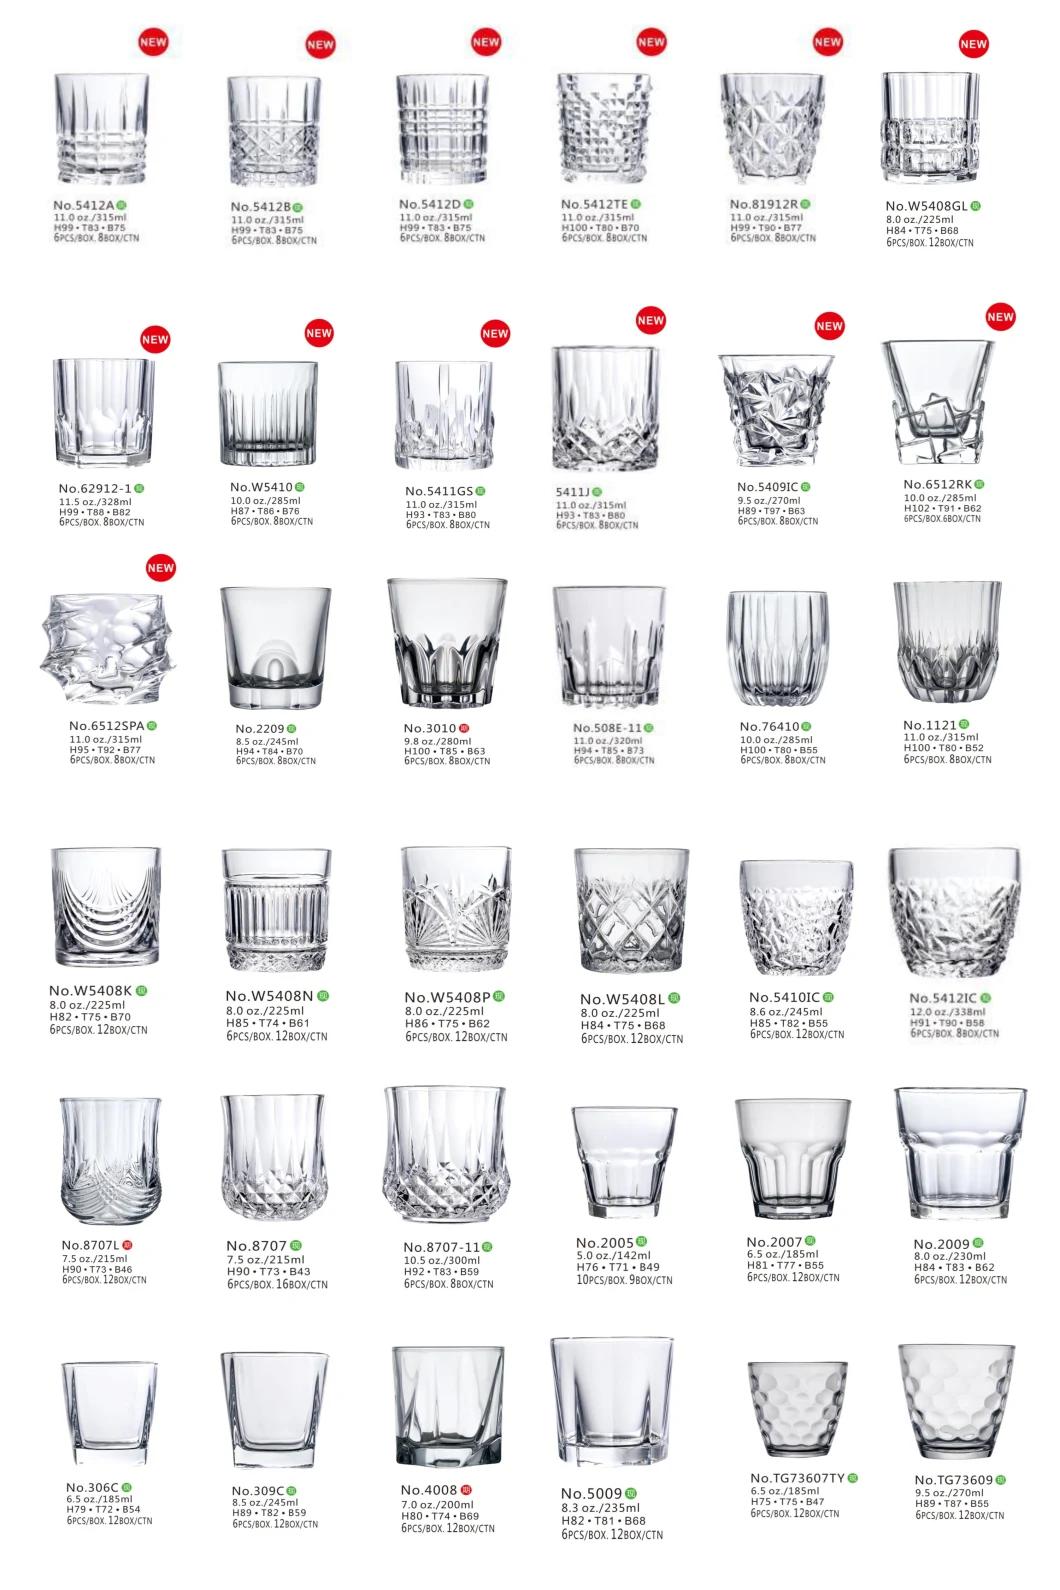 485ml Glass Cup/Water Cup/Drinking Glass/Drinking Cup/Glassware (116A)